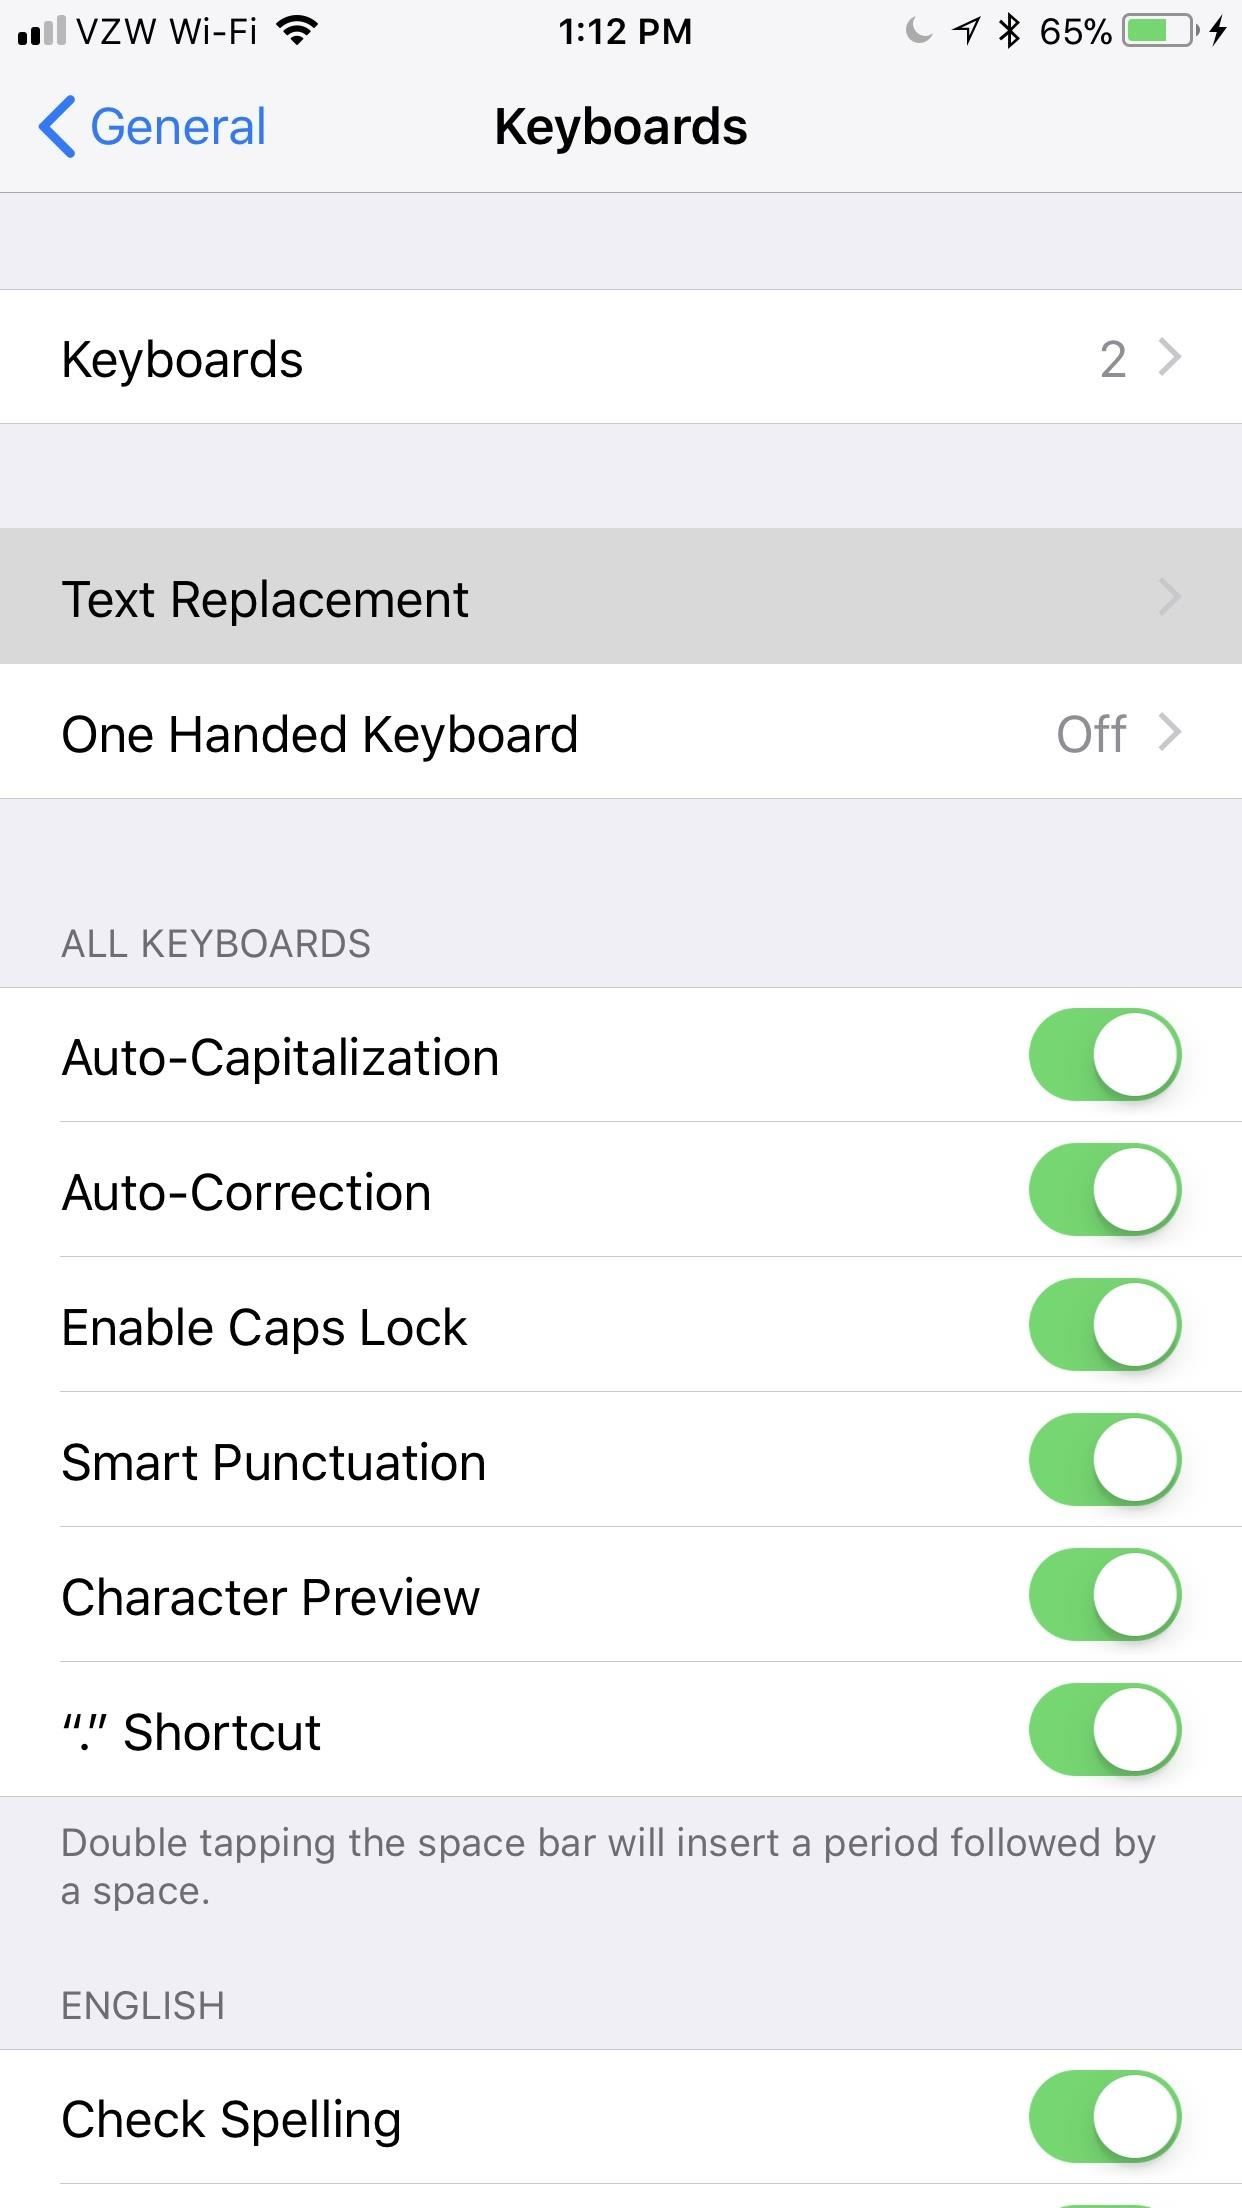 How to Use Keyboard Shortcuts to Type Long Words & Phrases Faster on Your iPhone